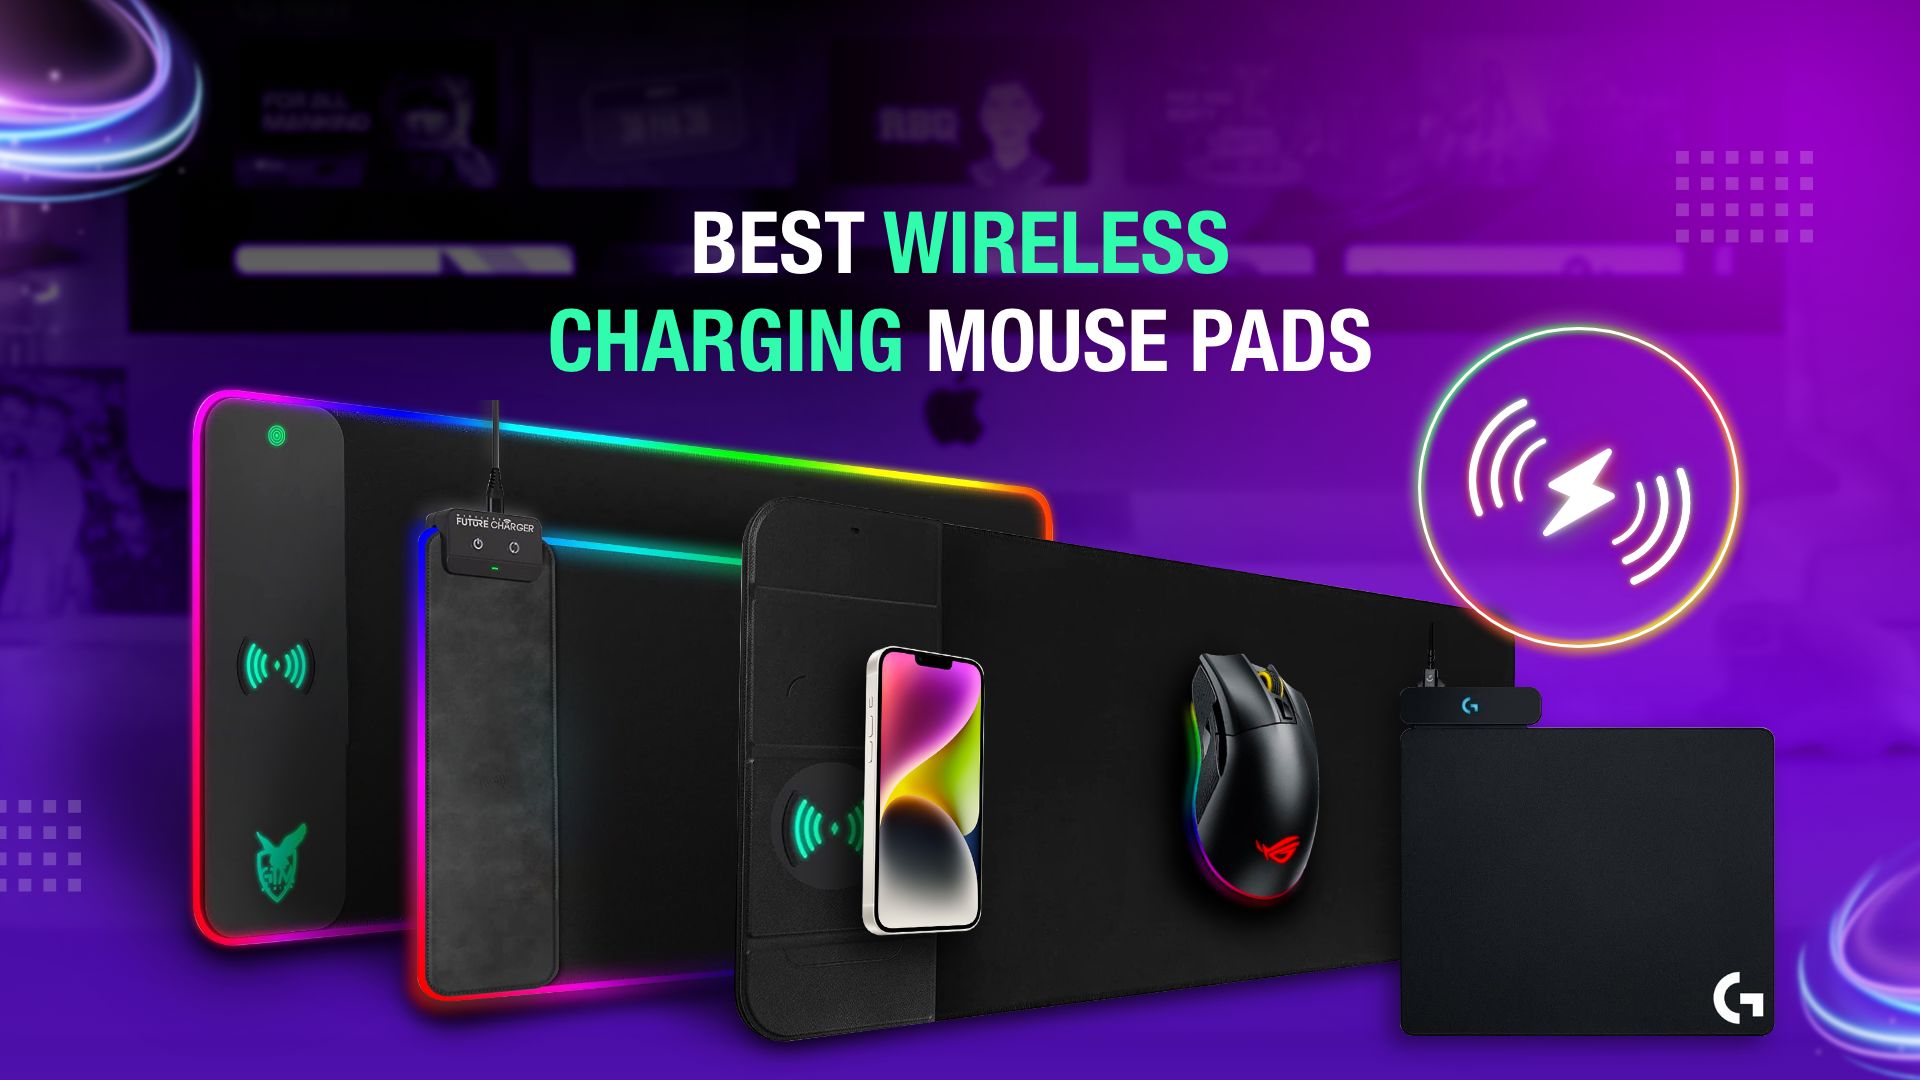 Best Wireless Charging Mouse Pads in 2022